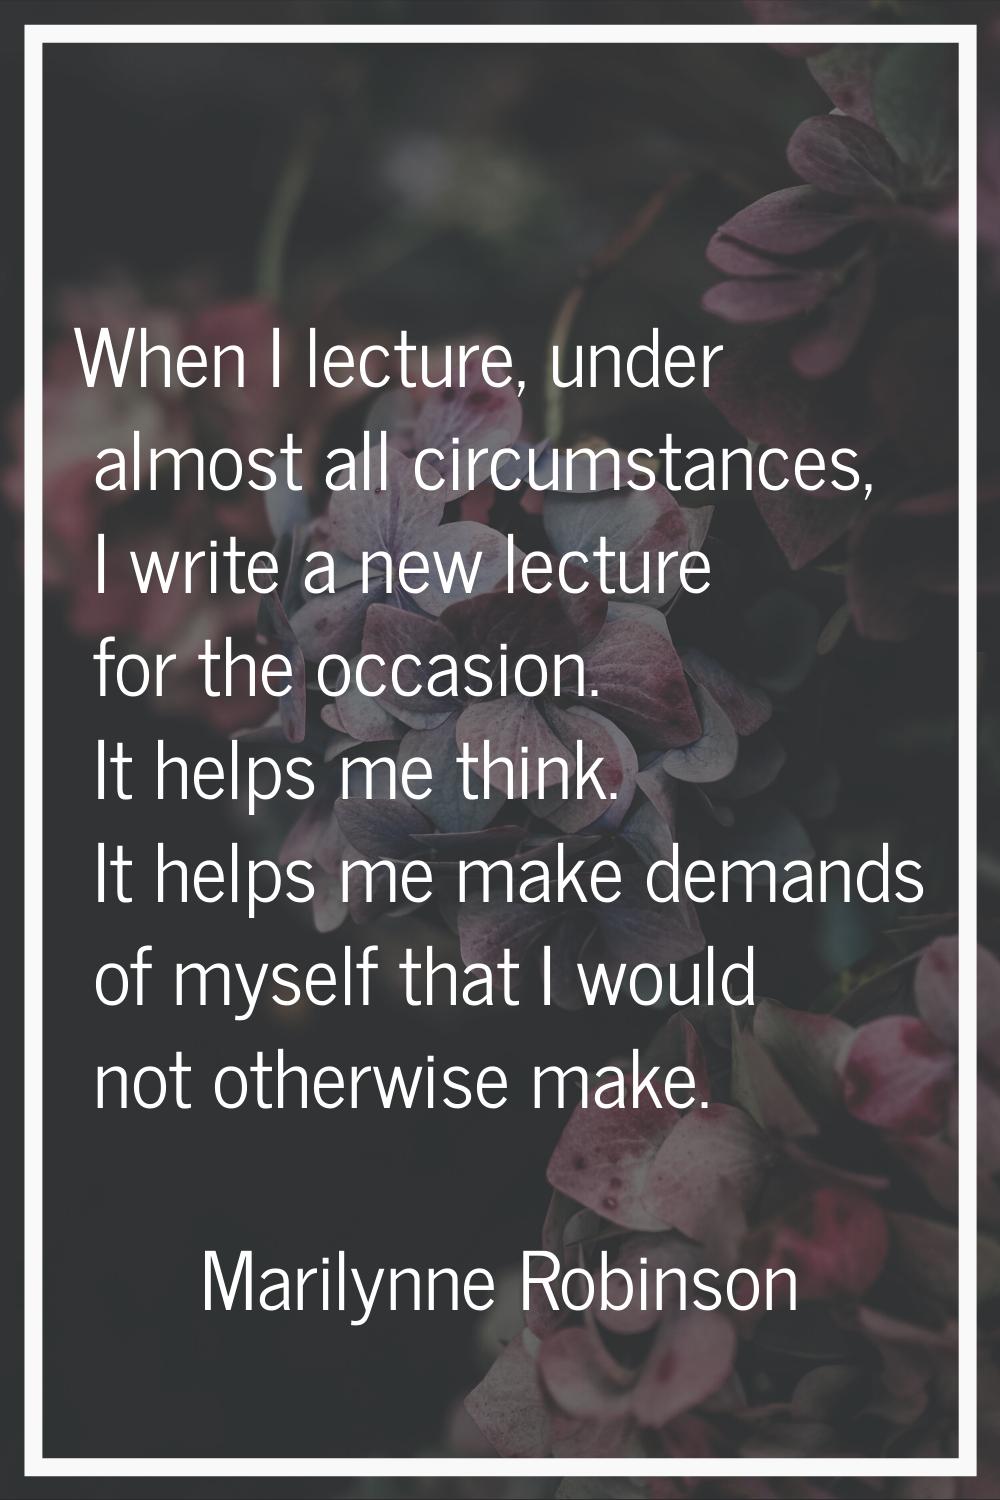 When I lecture, under almost all circumstances, I write a new lecture for the occasion. It helps me